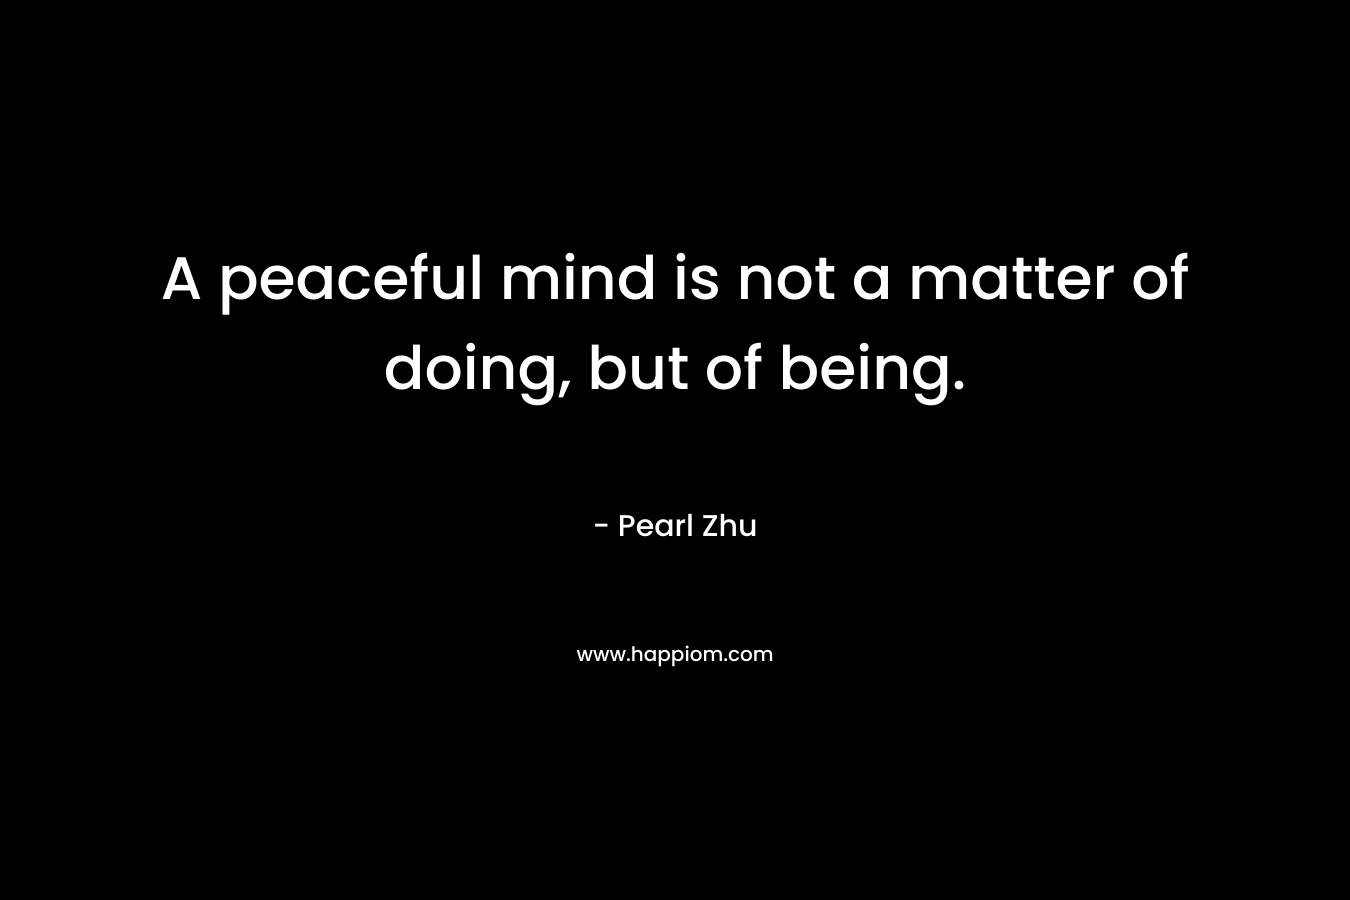 A peaceful mind is not a matter of doing, but of being.